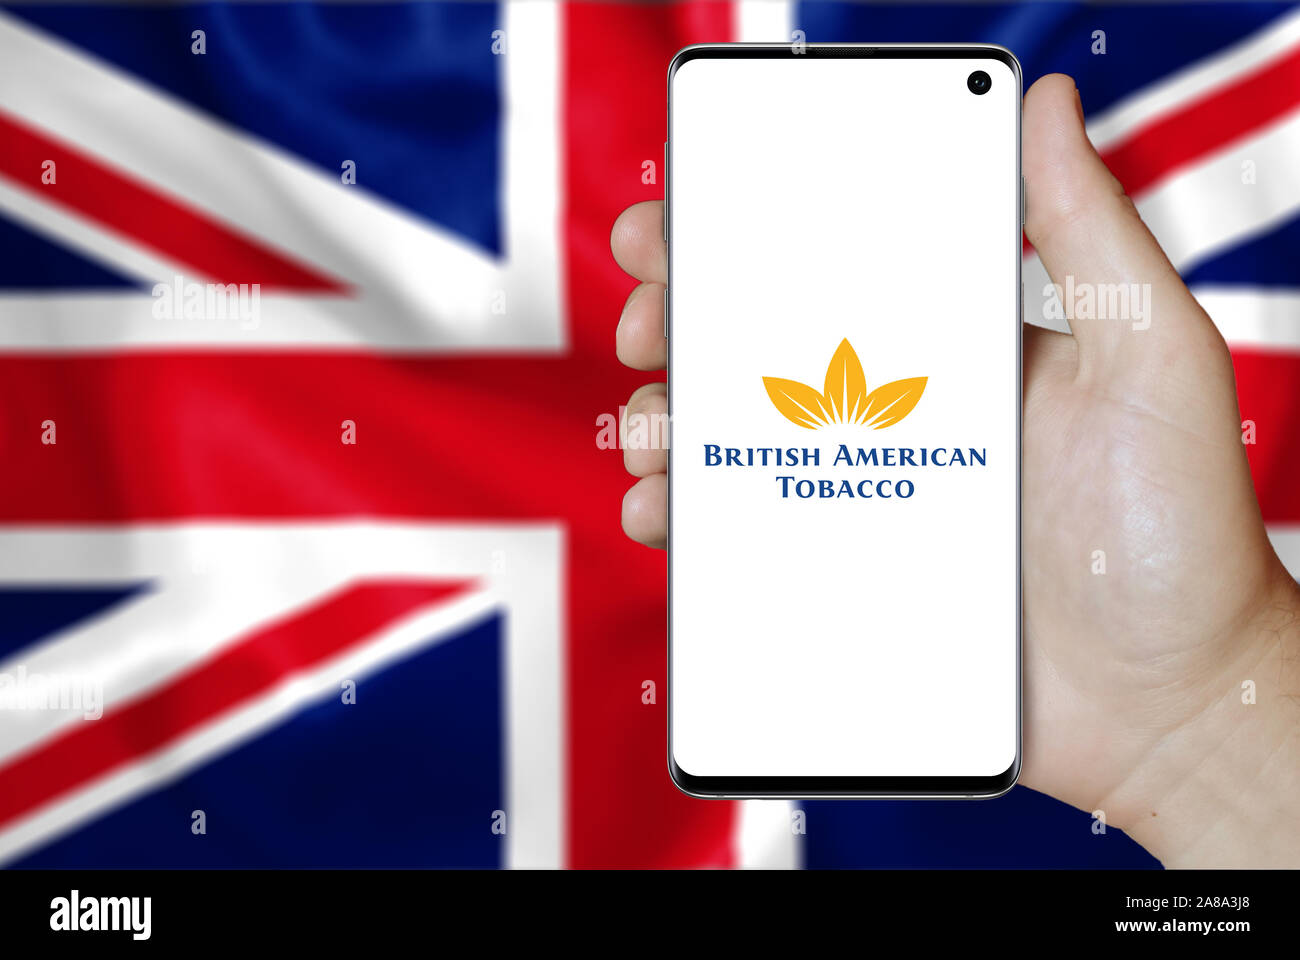 Logo of public company British American Tobacco displayed on a smartphone. Flag of UK background. Credit: PIXDUCE Stock Photo